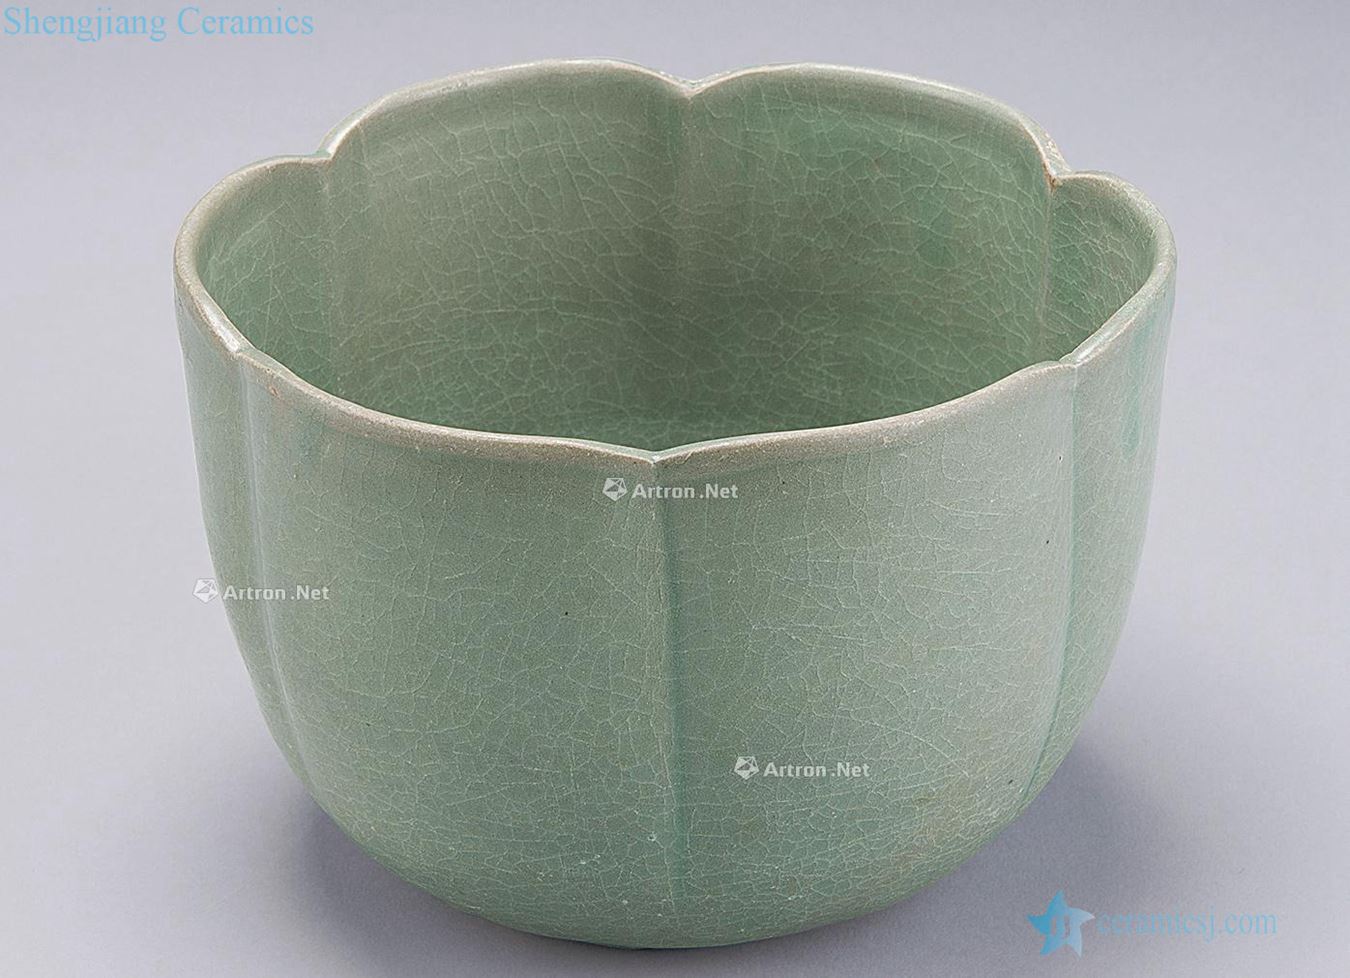 In the 12th century green magnetic bowls